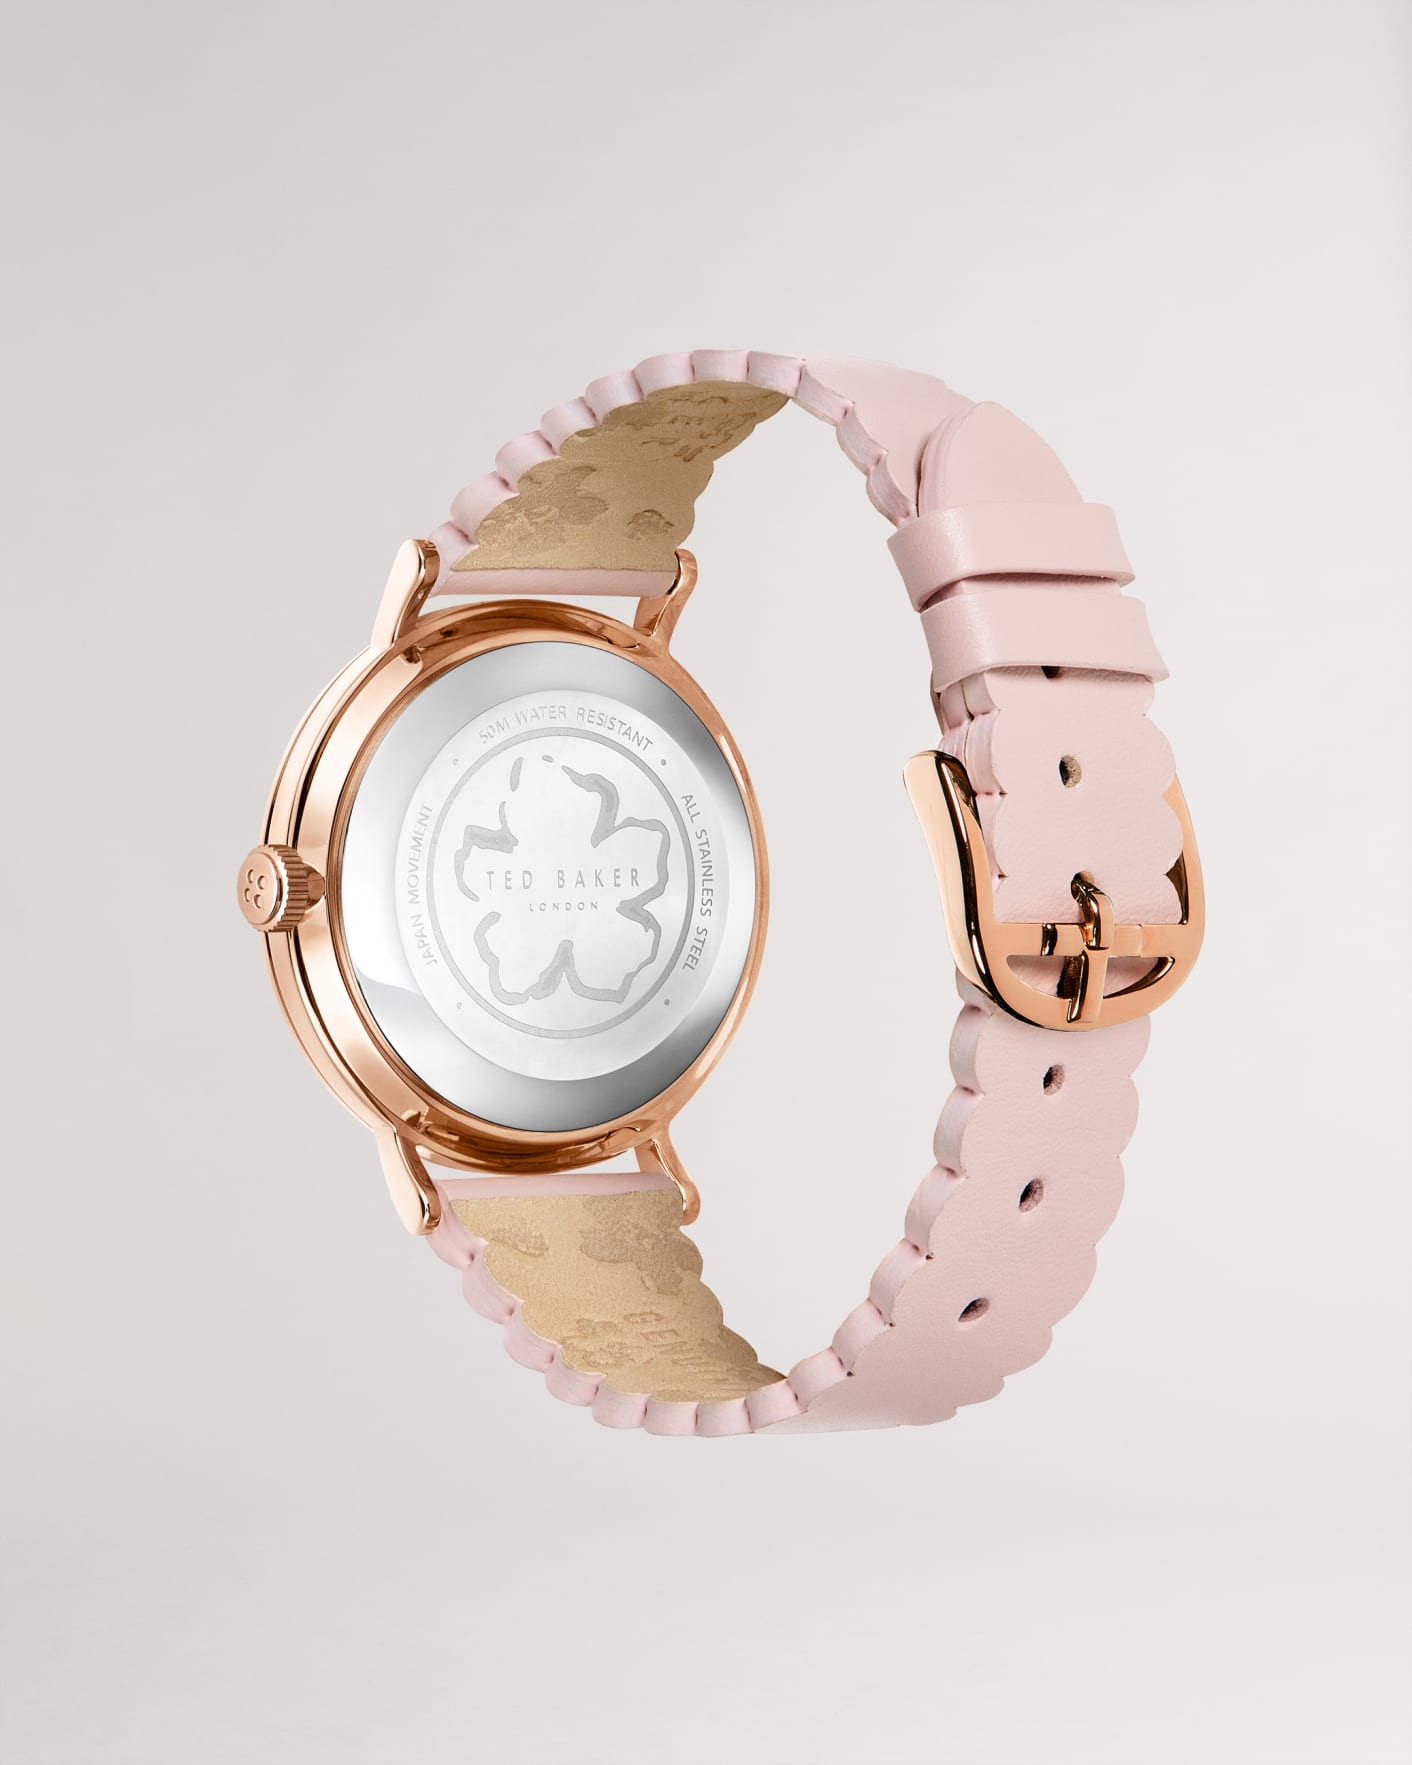 Light Pink Floral Dial Leather Strap Watch Ted Baker